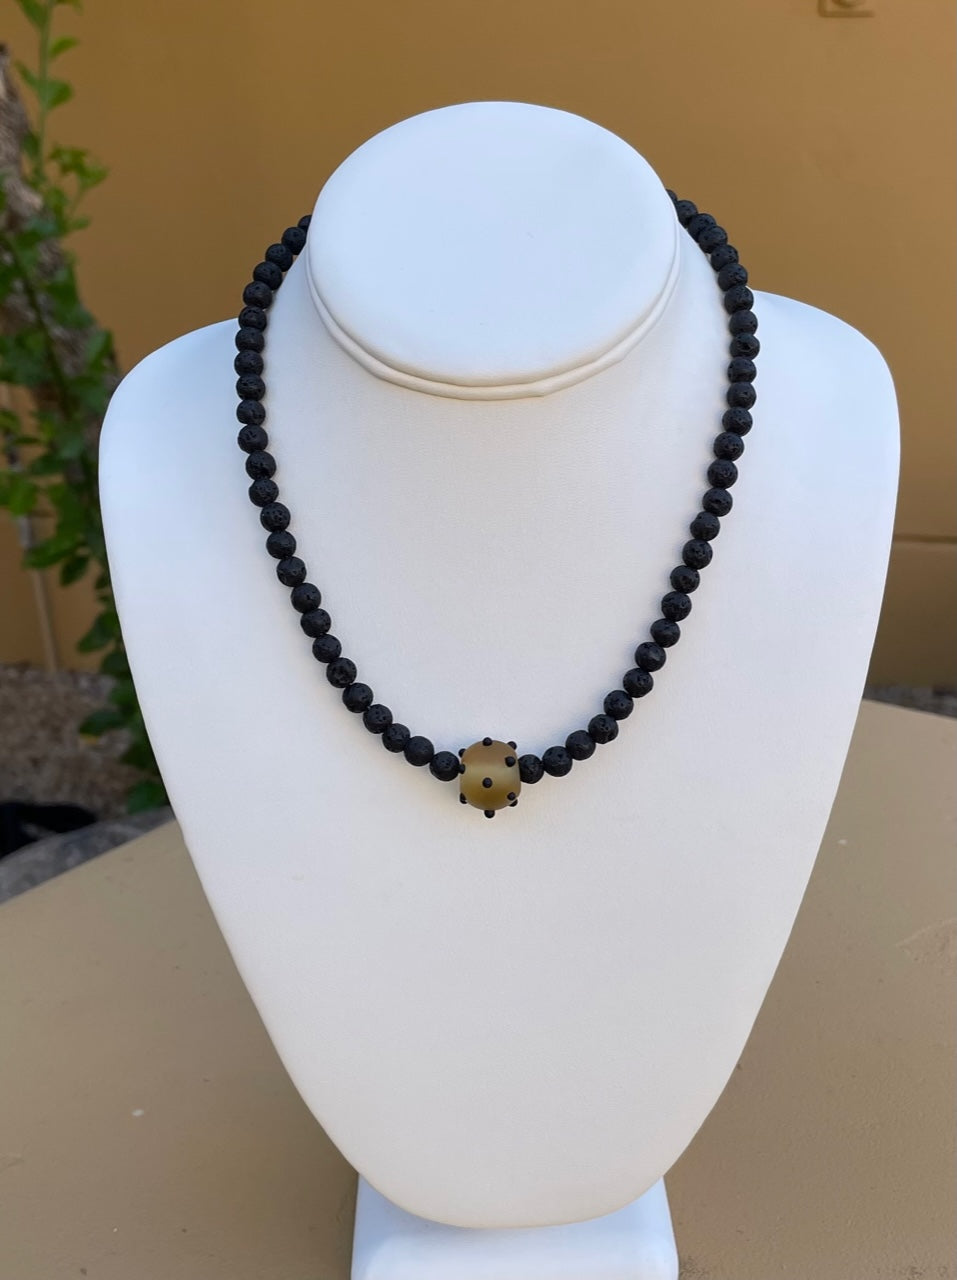 Necklace - Black lava stone beaded necklace with handmade glass bead as focal point